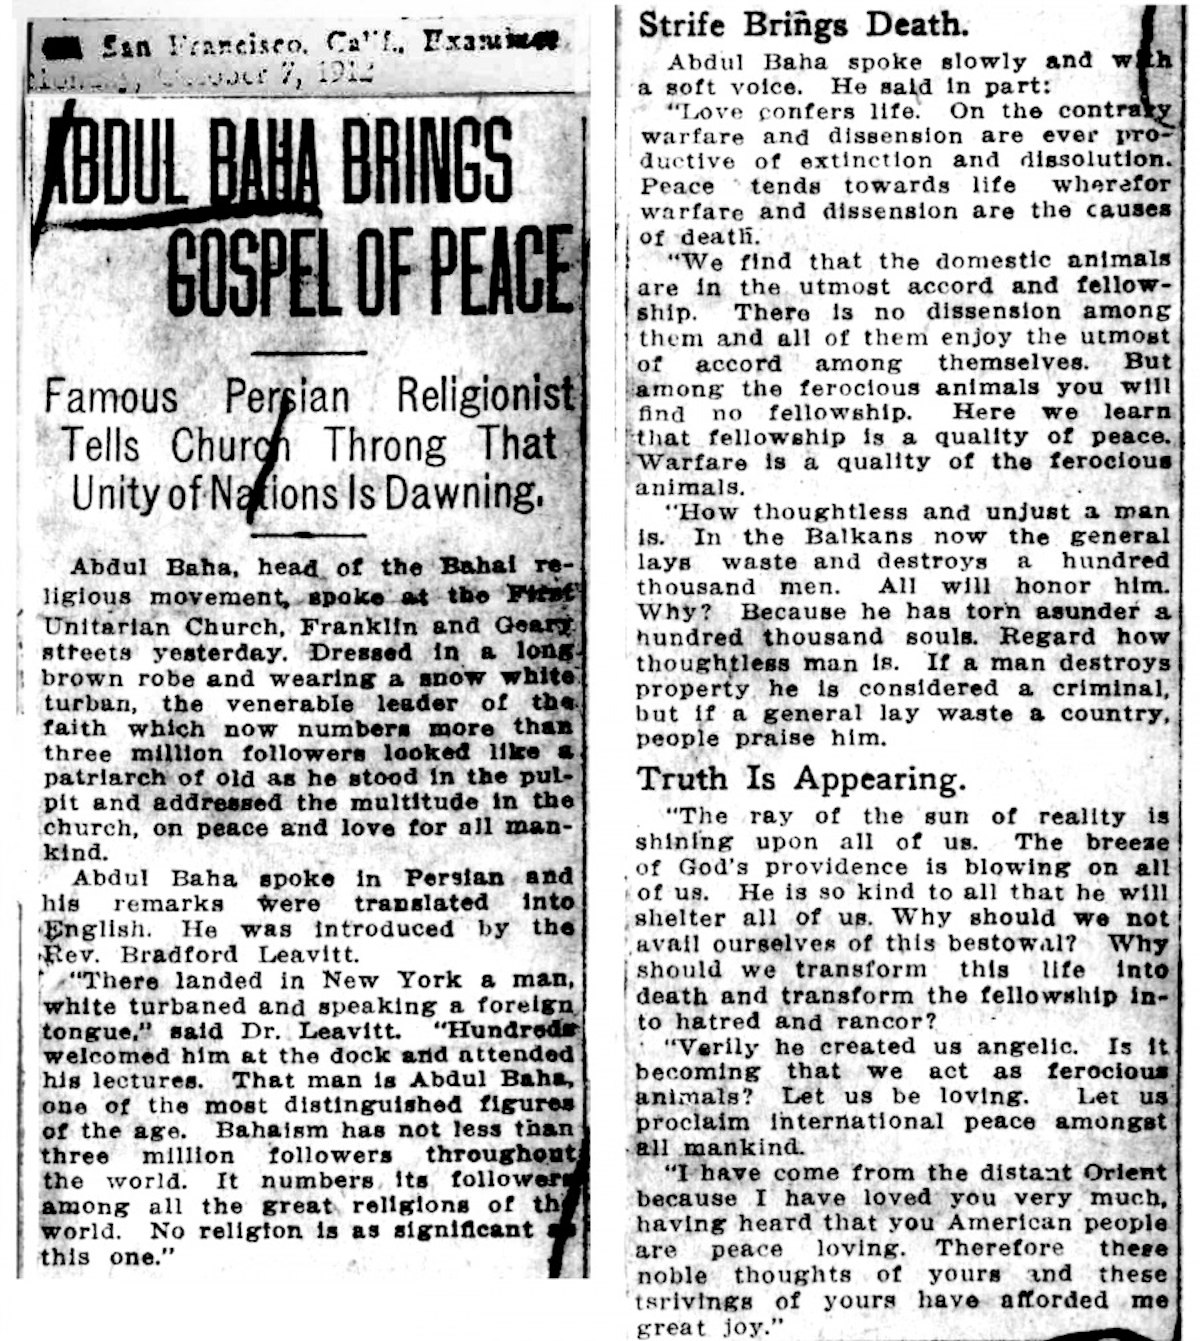 This article from The San Francisco Examiner on 6 October 1912 highlights ‘Abdu’l-Baha’s comments in a talk given on the previous day.